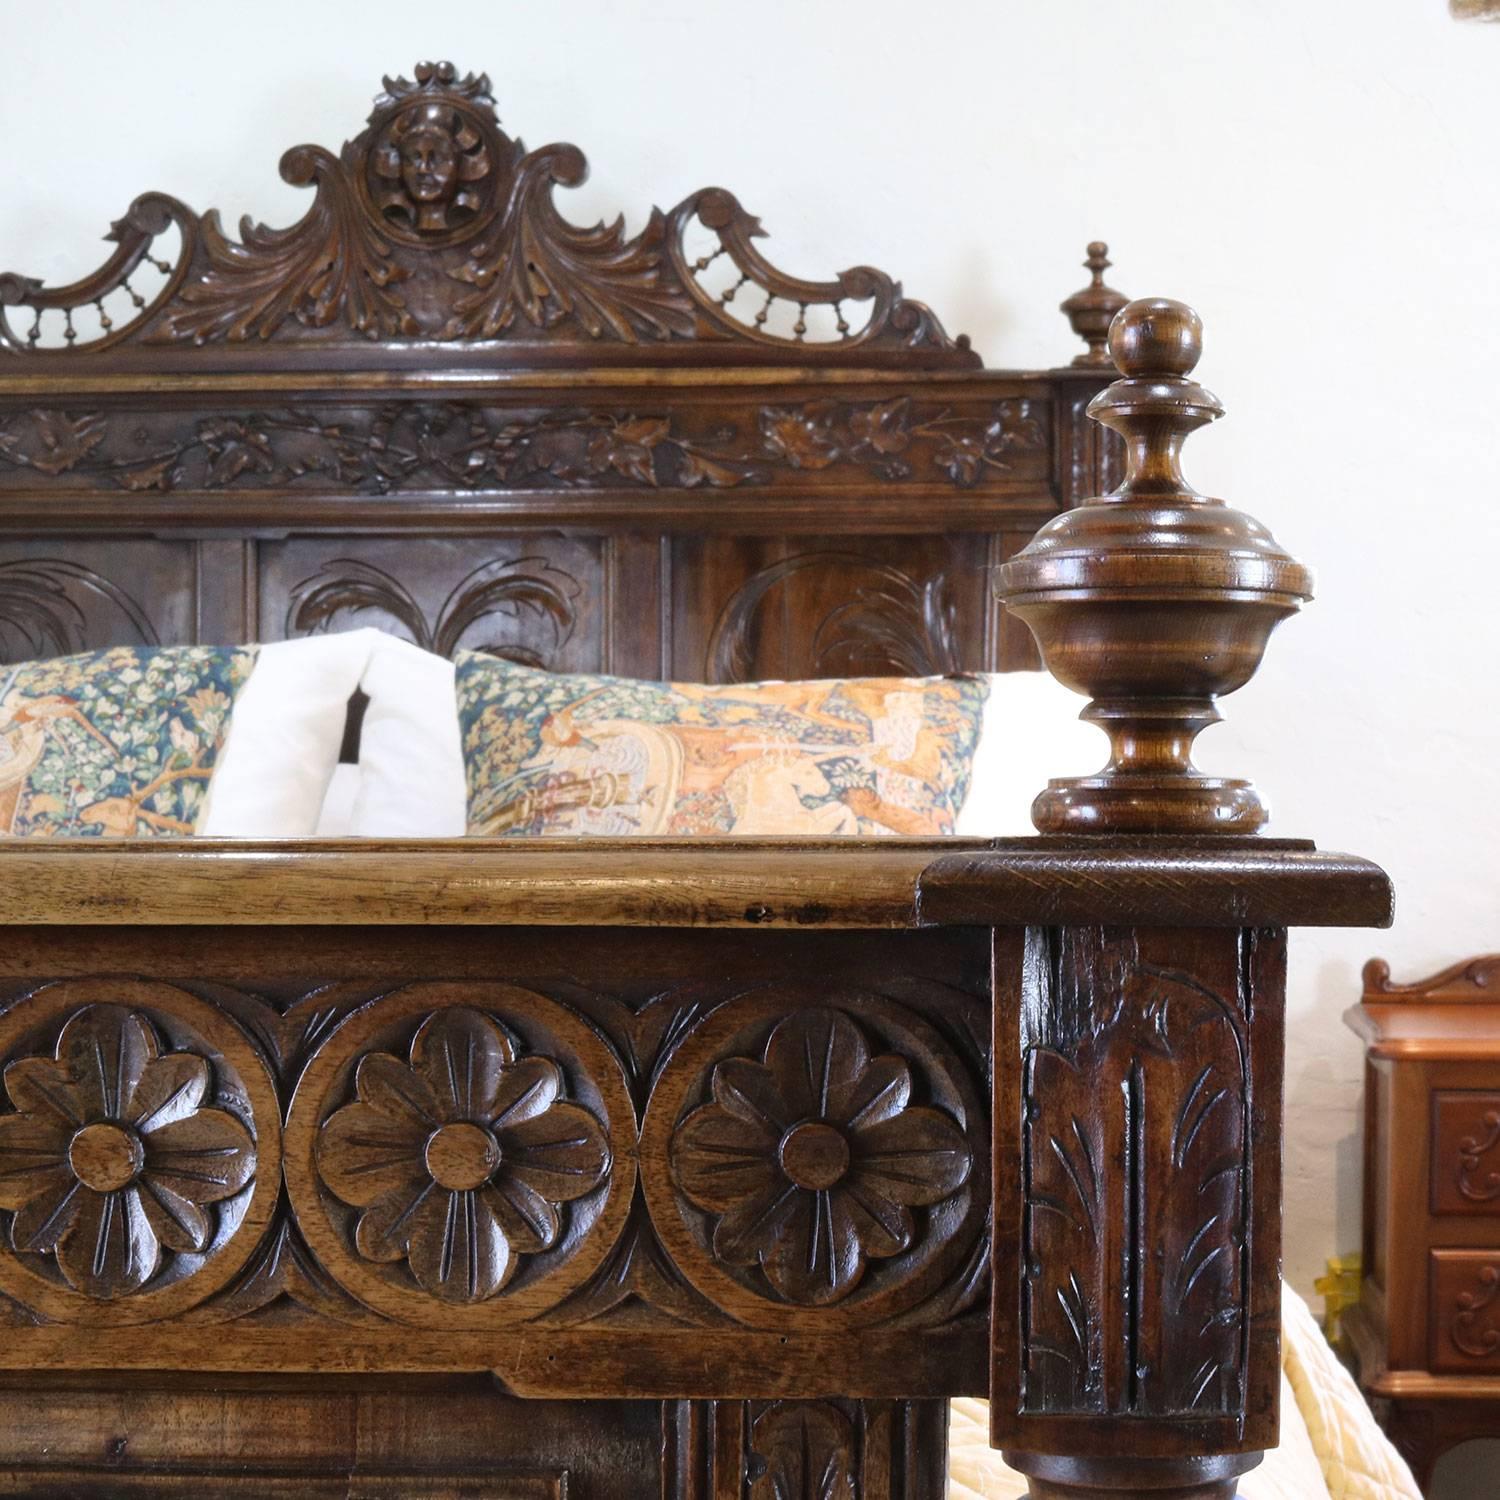 An oak Breton bed with fine carvings depicting rural scenes.

This bed accepts a British king-size or American queen-size (5ft, 60 in or 150 cm wide) base and mattress set.

The price is for the bed frame alone. The base, mattress, bedding and